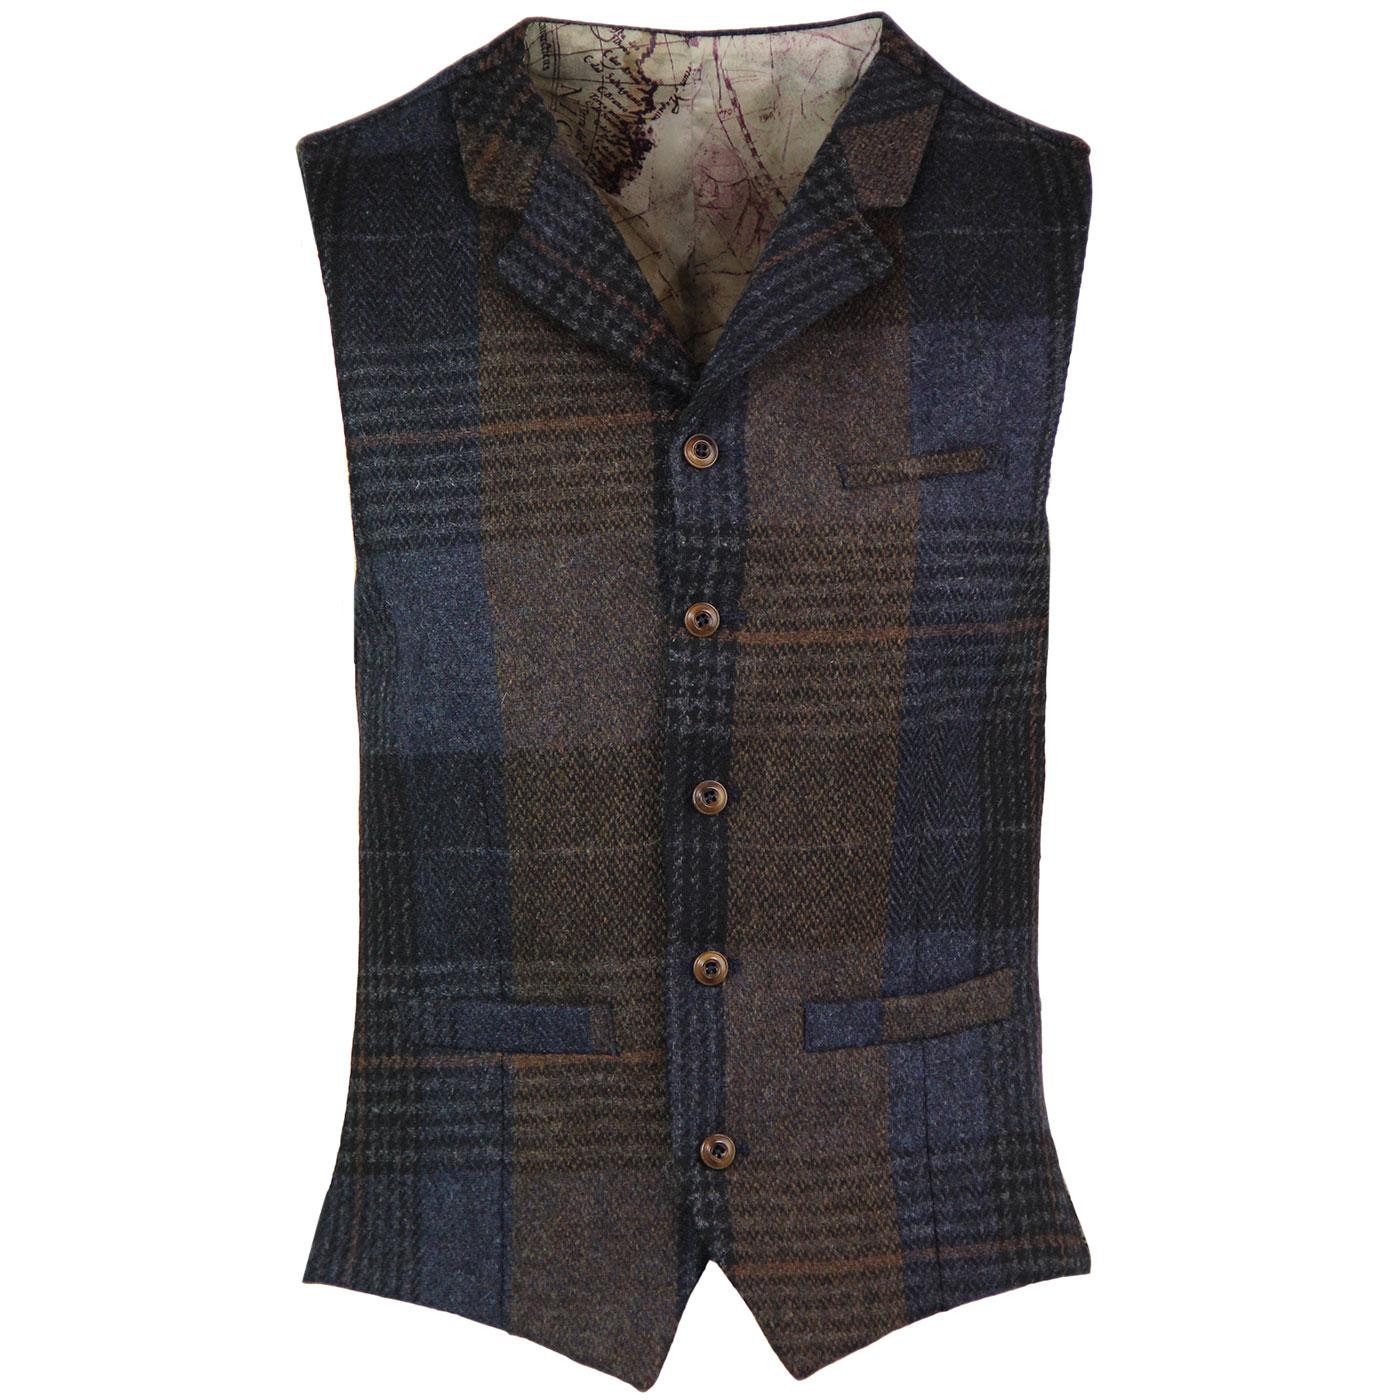 GIBSON LONDON Mod Check Lapel Waistcoat in Navy/Brown